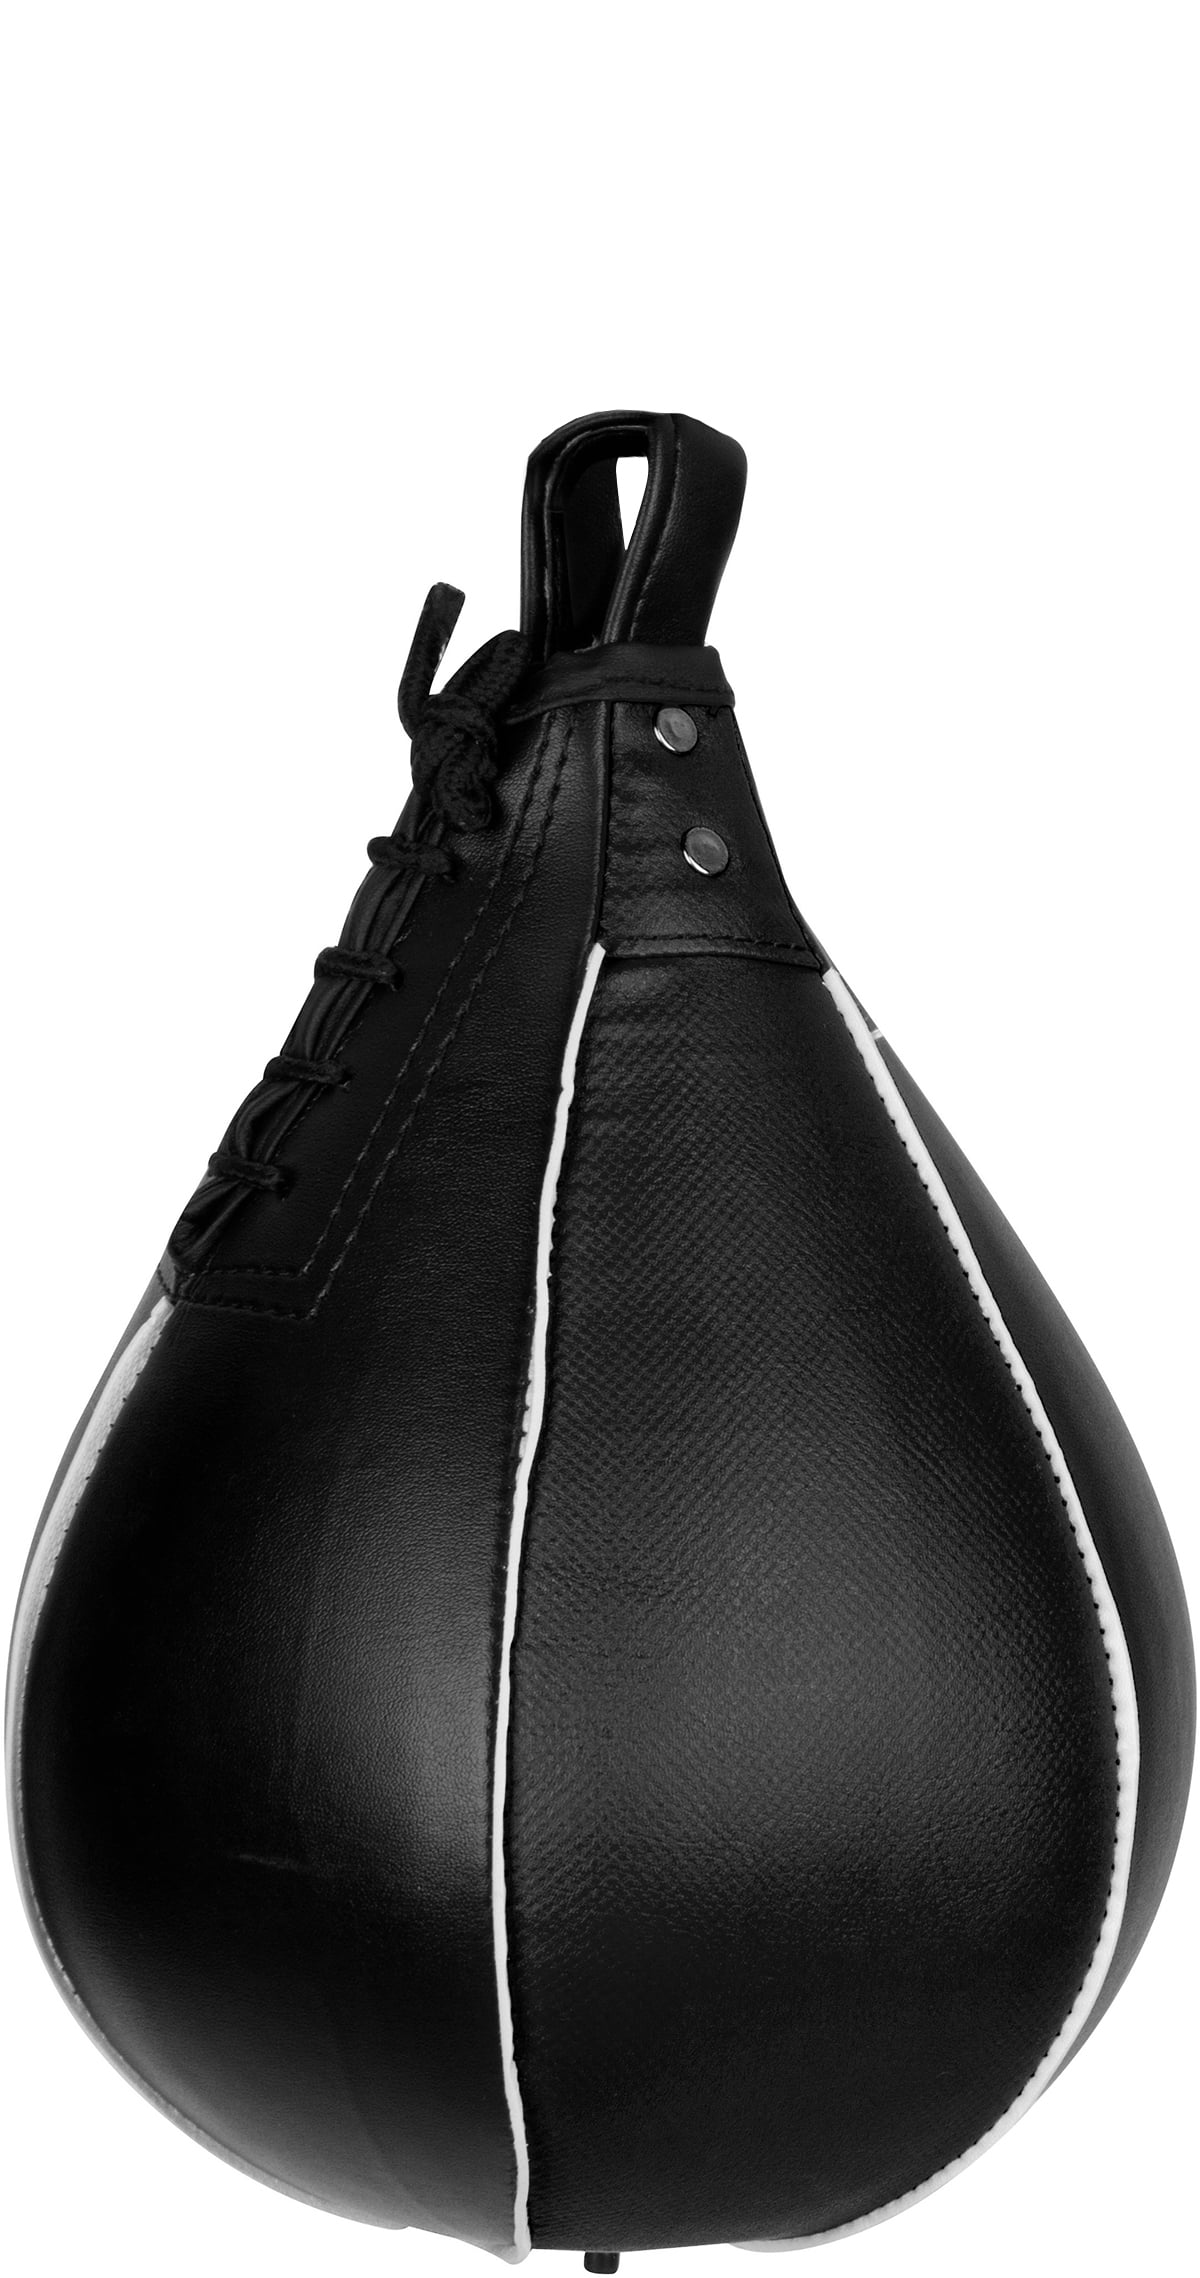 Boxing Speed Bag For Workout Training by Trademark Innovations - www.speedy25.com